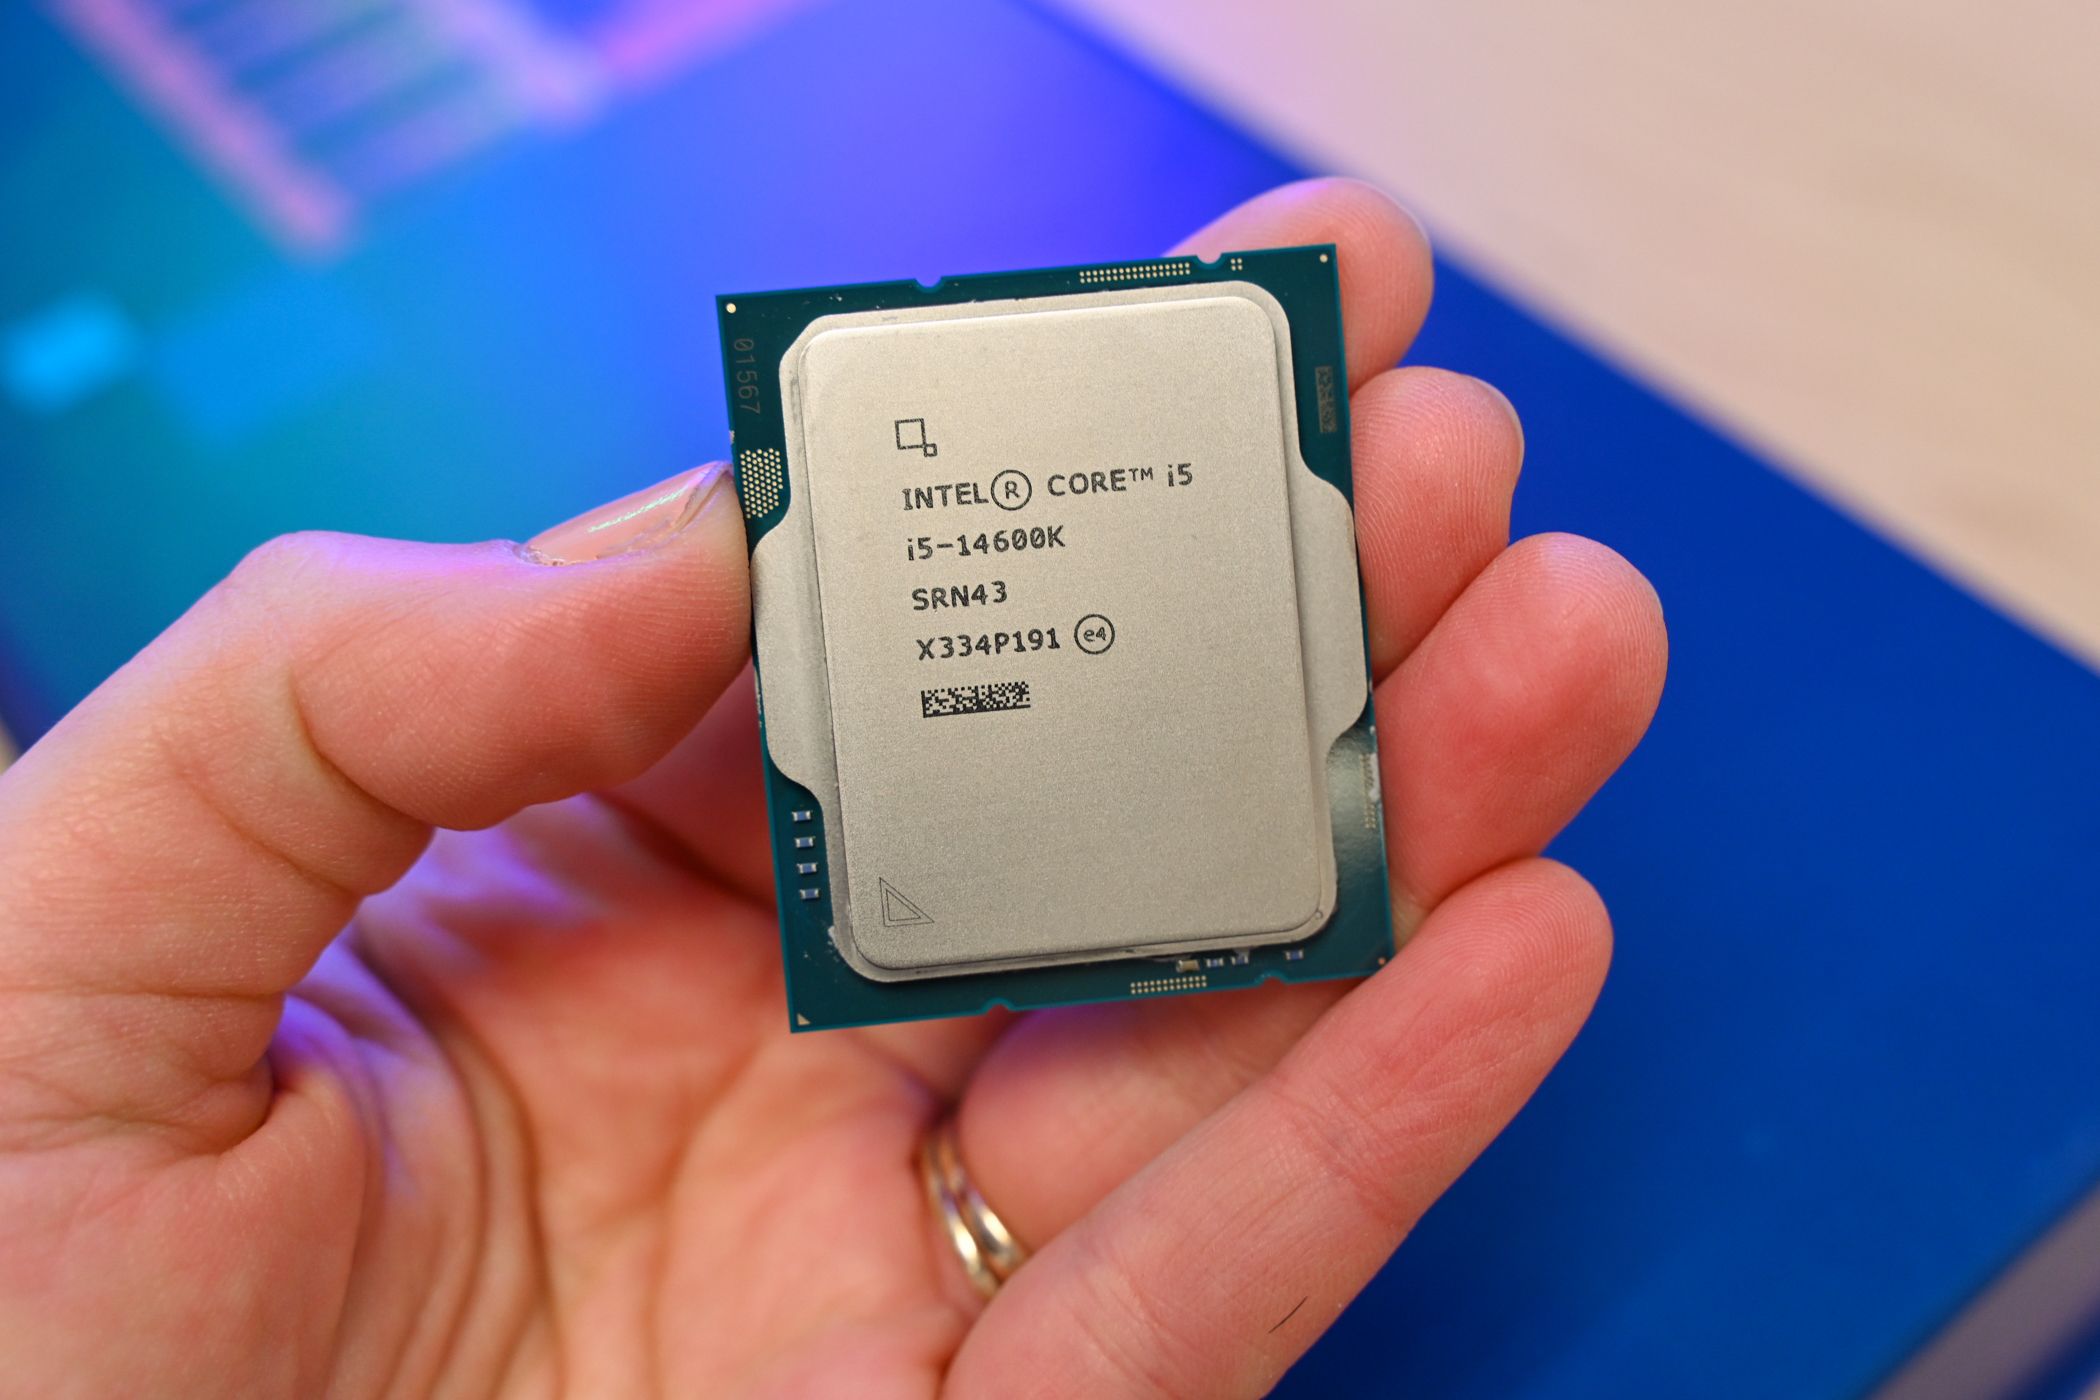 Front of the Intel Core i5 Gen 14 CPU.